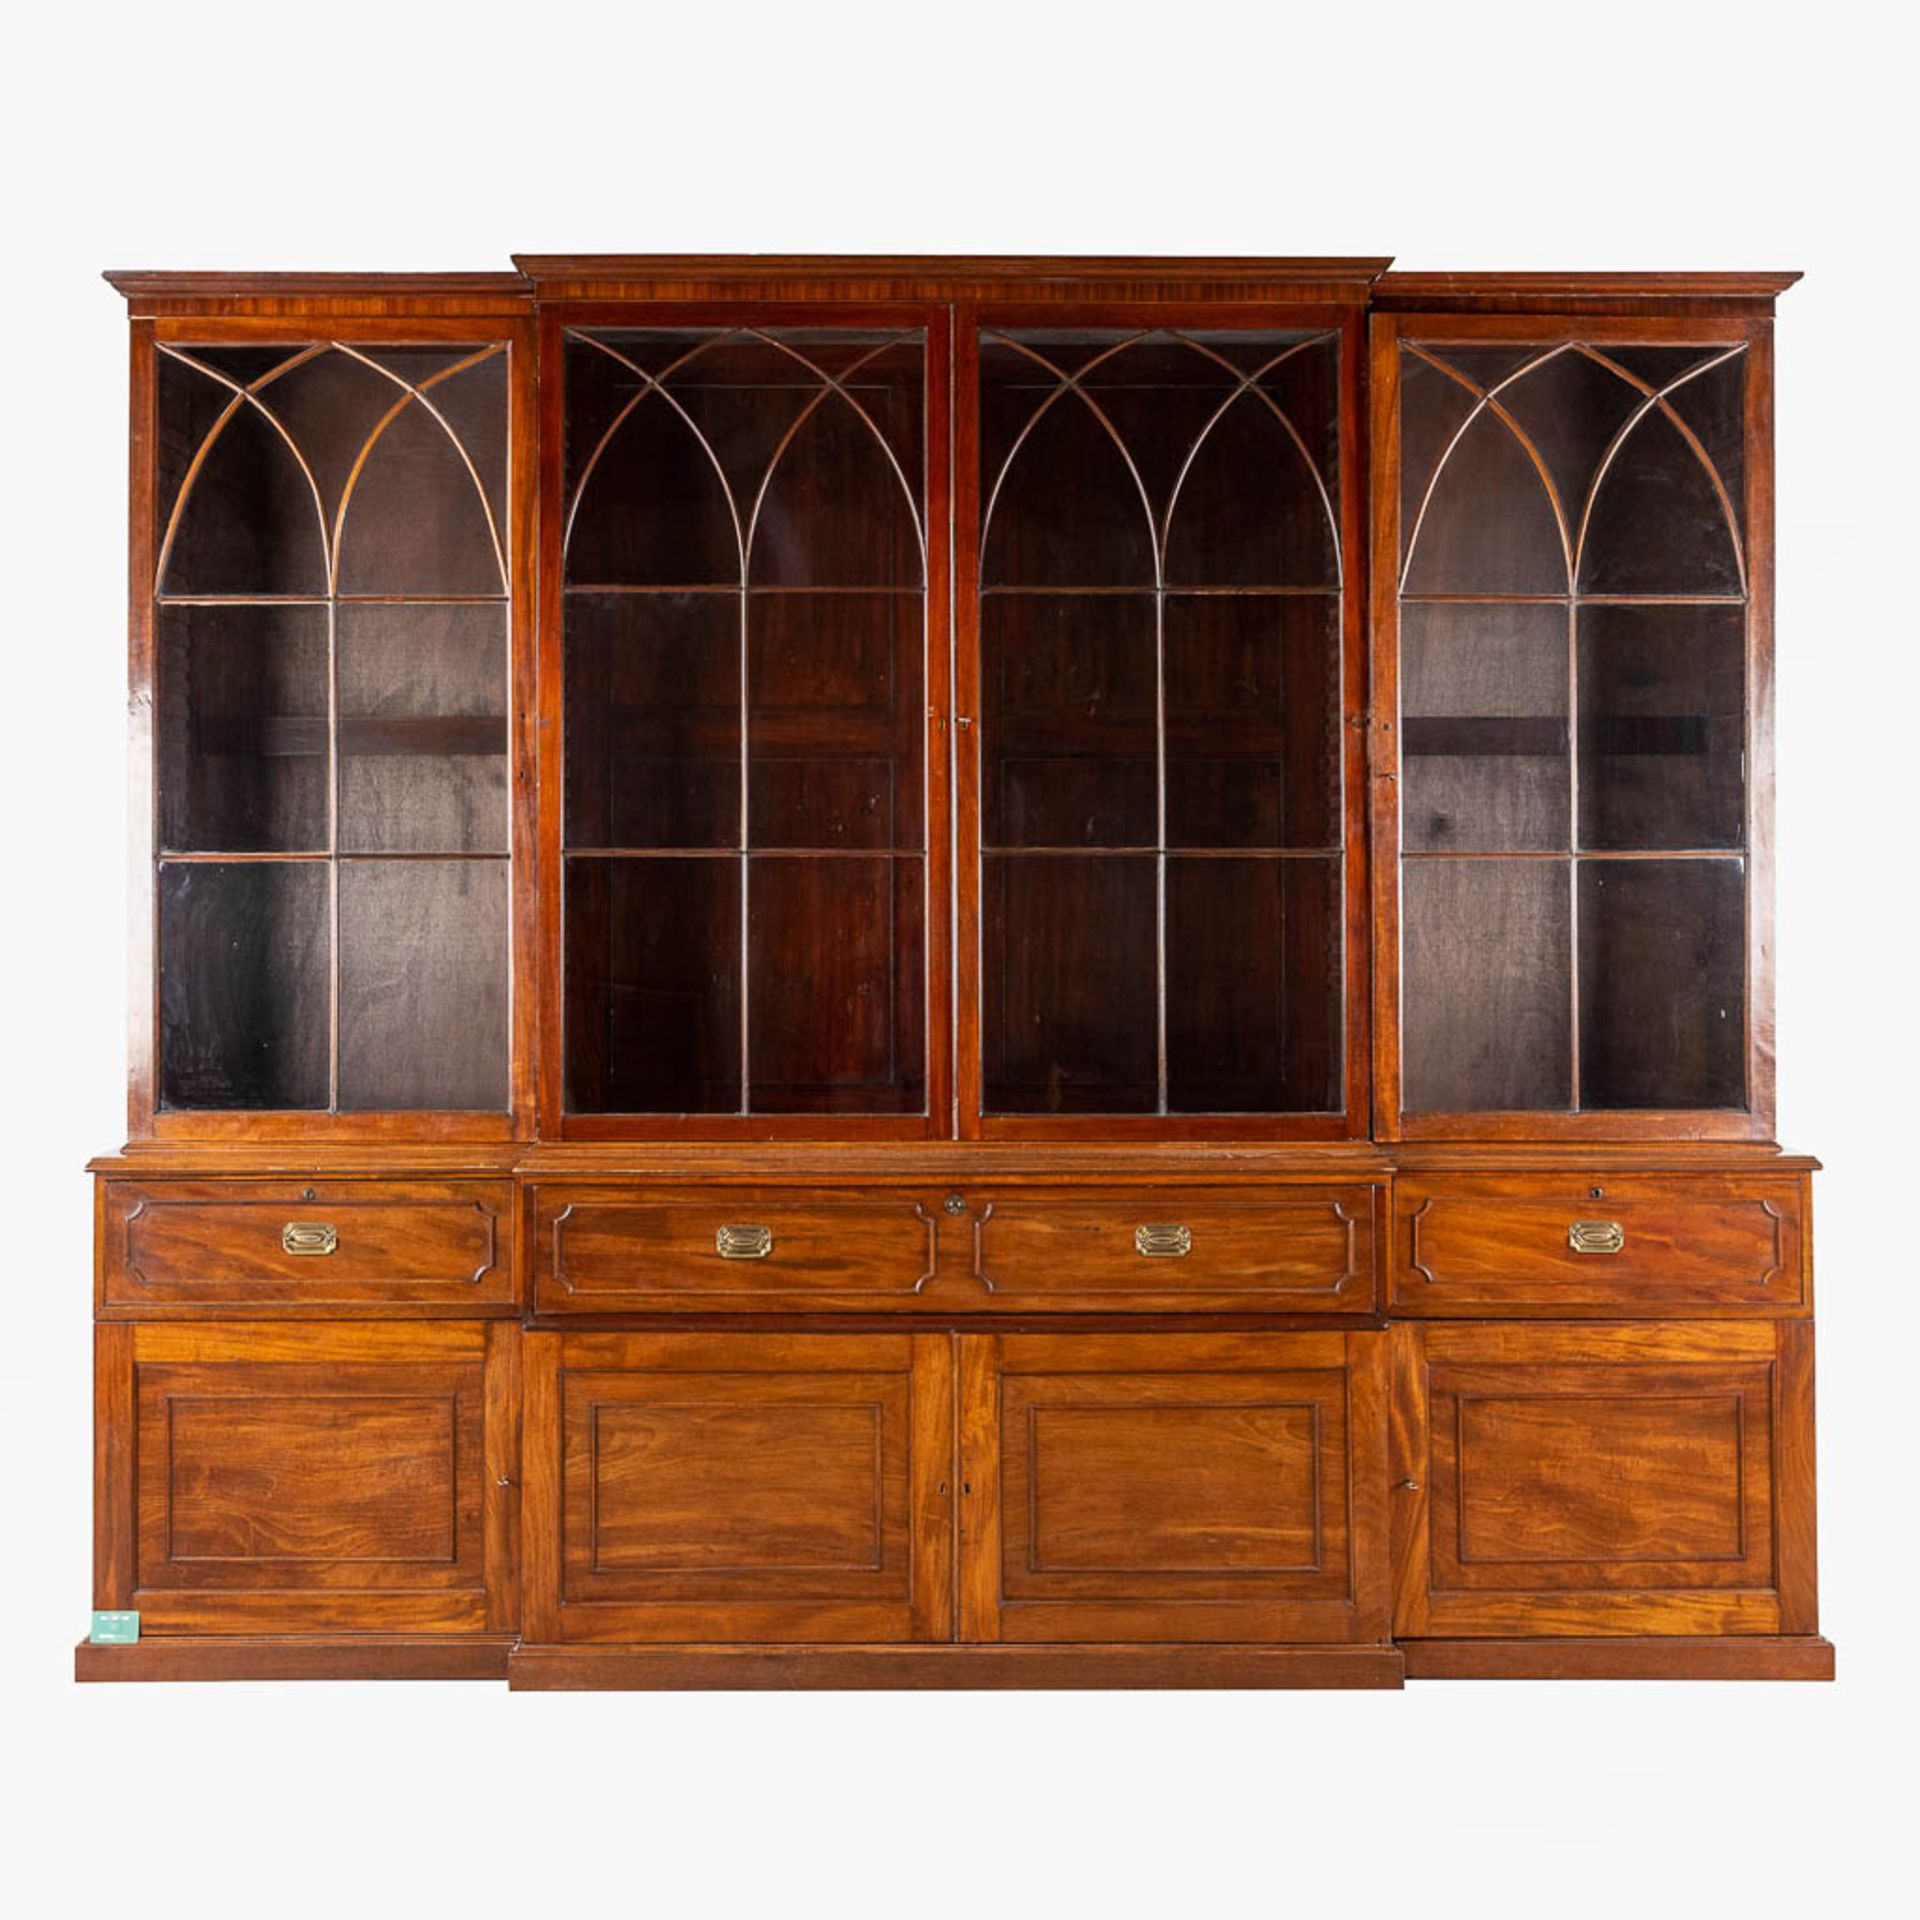 A monumental and antique English bookcase or library cabinet. 19th C. (D:63 x W:317 x H:262 cm) - Bild 2 aus 13